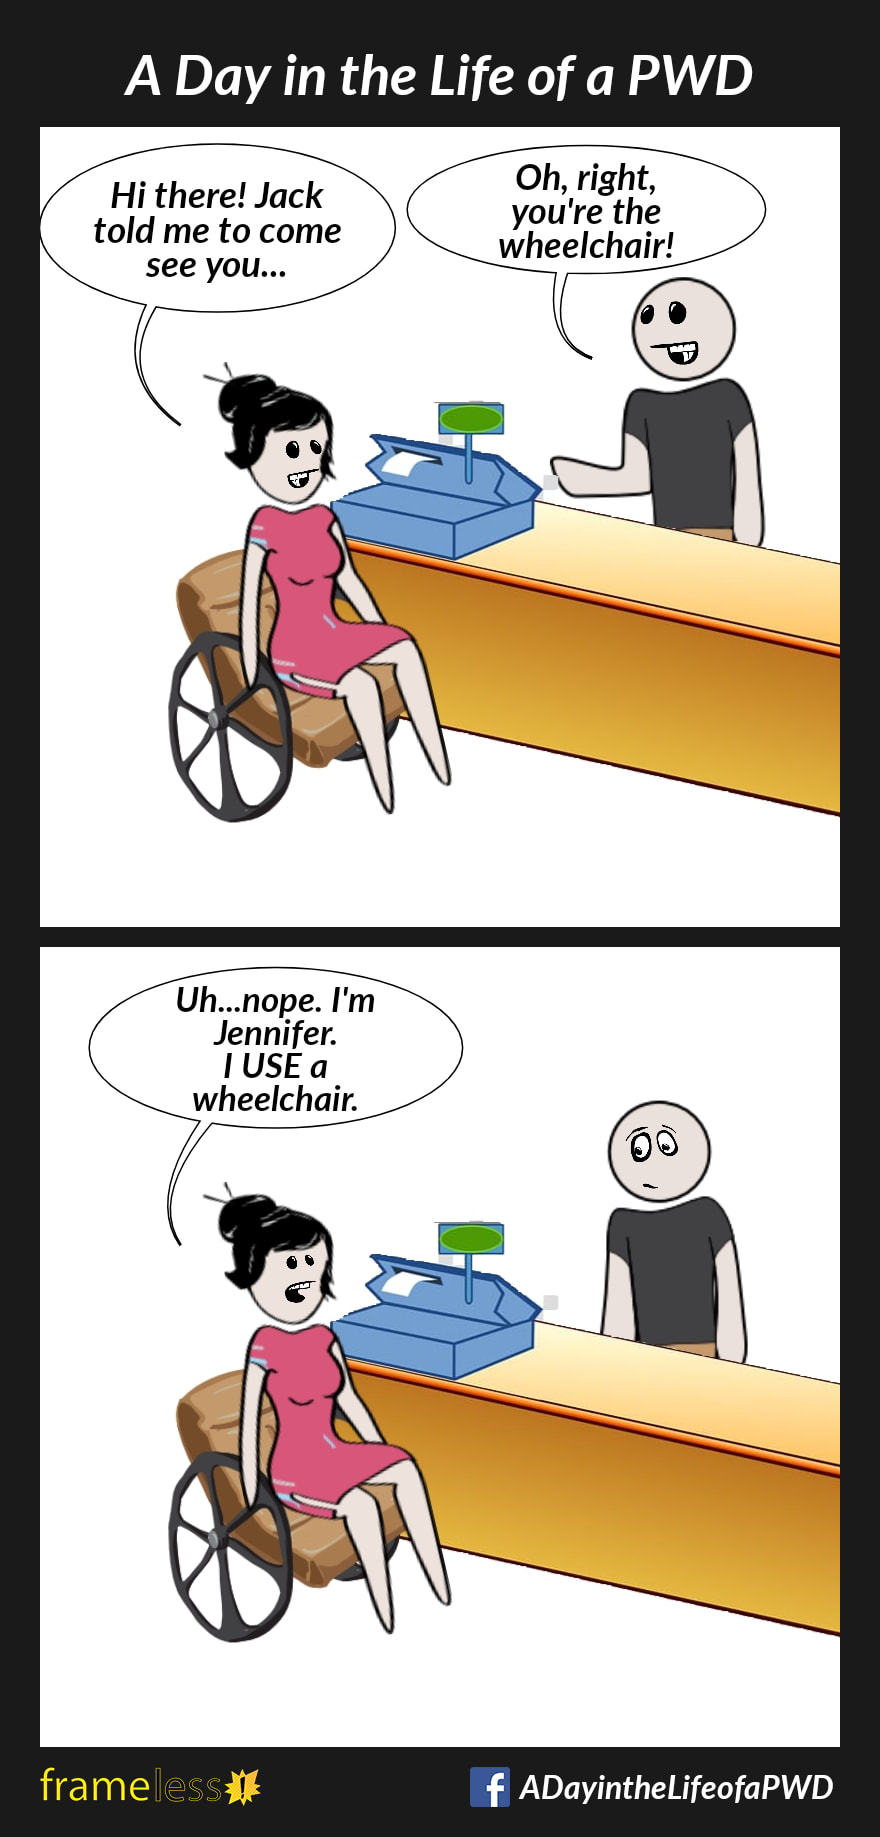 COMIC STRIP 
A Day in the Life of a PWD (Person With a Disability) 

Frame 1:
A woman in a wheelchair approaches a cashier's counter.
WOMAN: Hi there! Jack told me to come see you...
CASHIER: Oh, right, you're the wheelchair!

Frame 2:
WOMAN: Uh...nope. I'm Jennifer. I USE a wheelchair. 